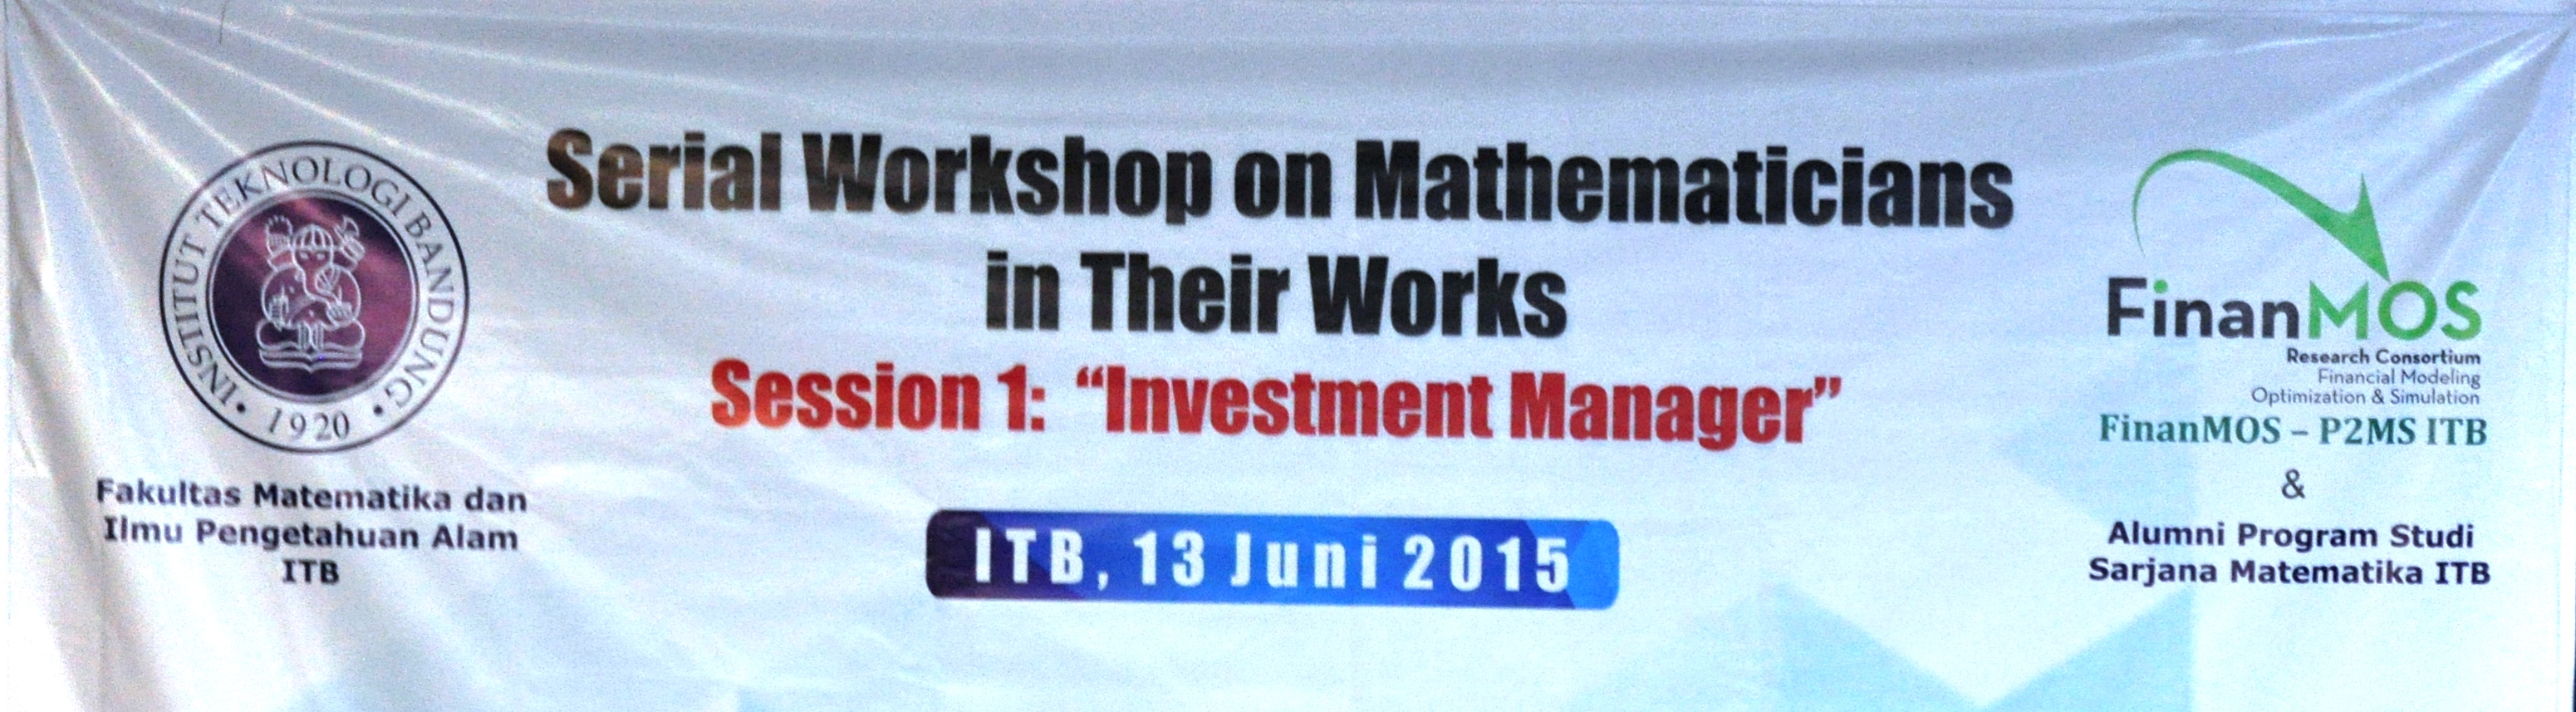 Serial Workshops on Mathematicians in Their Works: Investment Manager